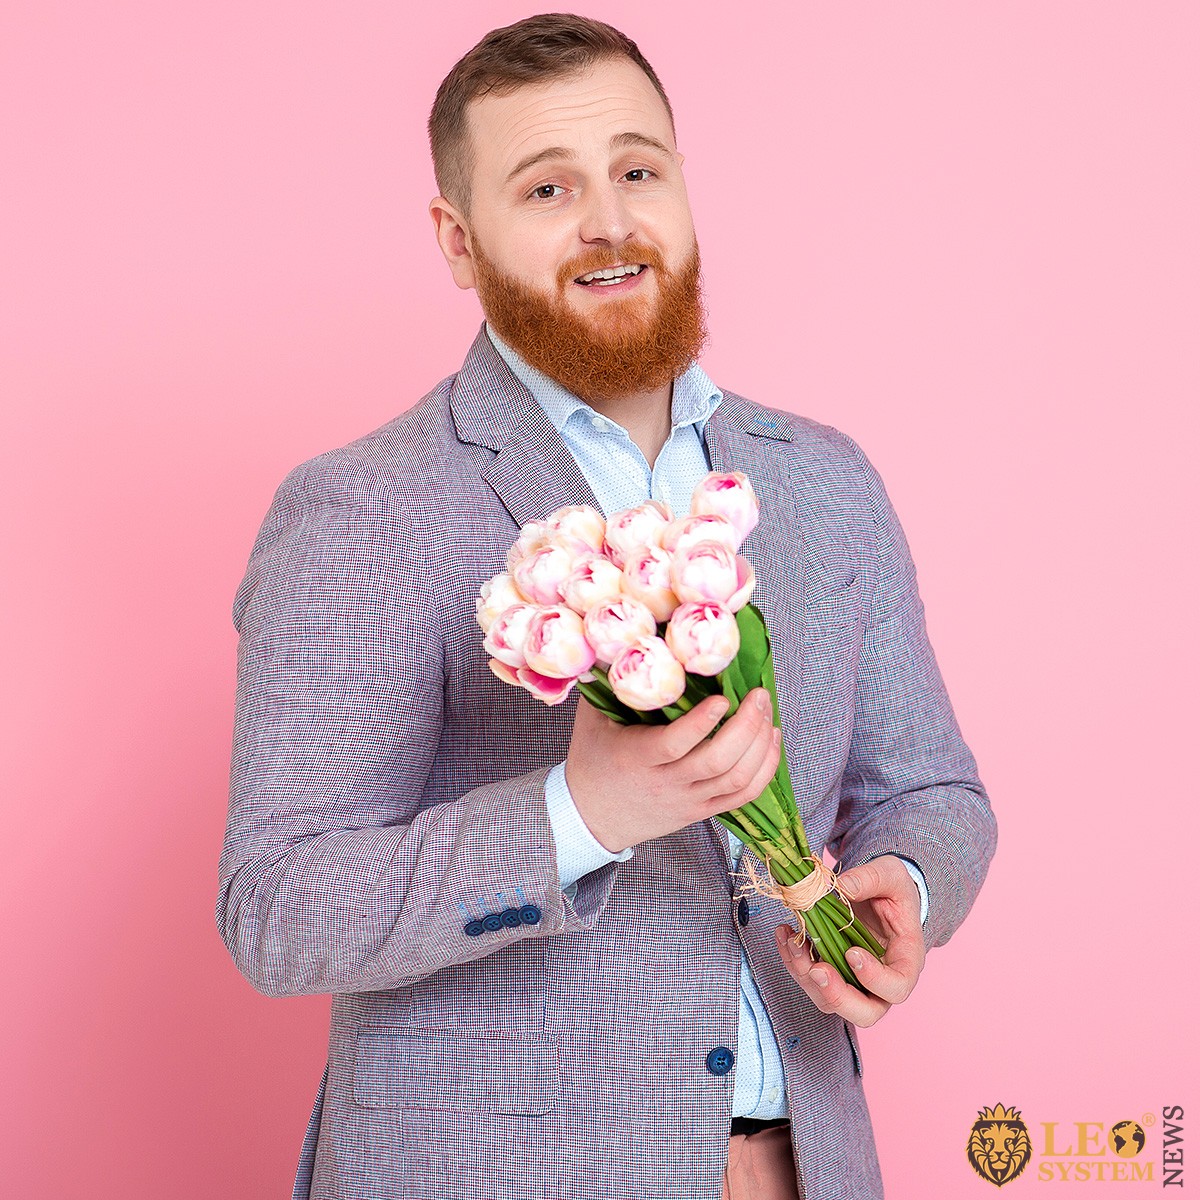 Image of a handsome man with a bouquet of flowers